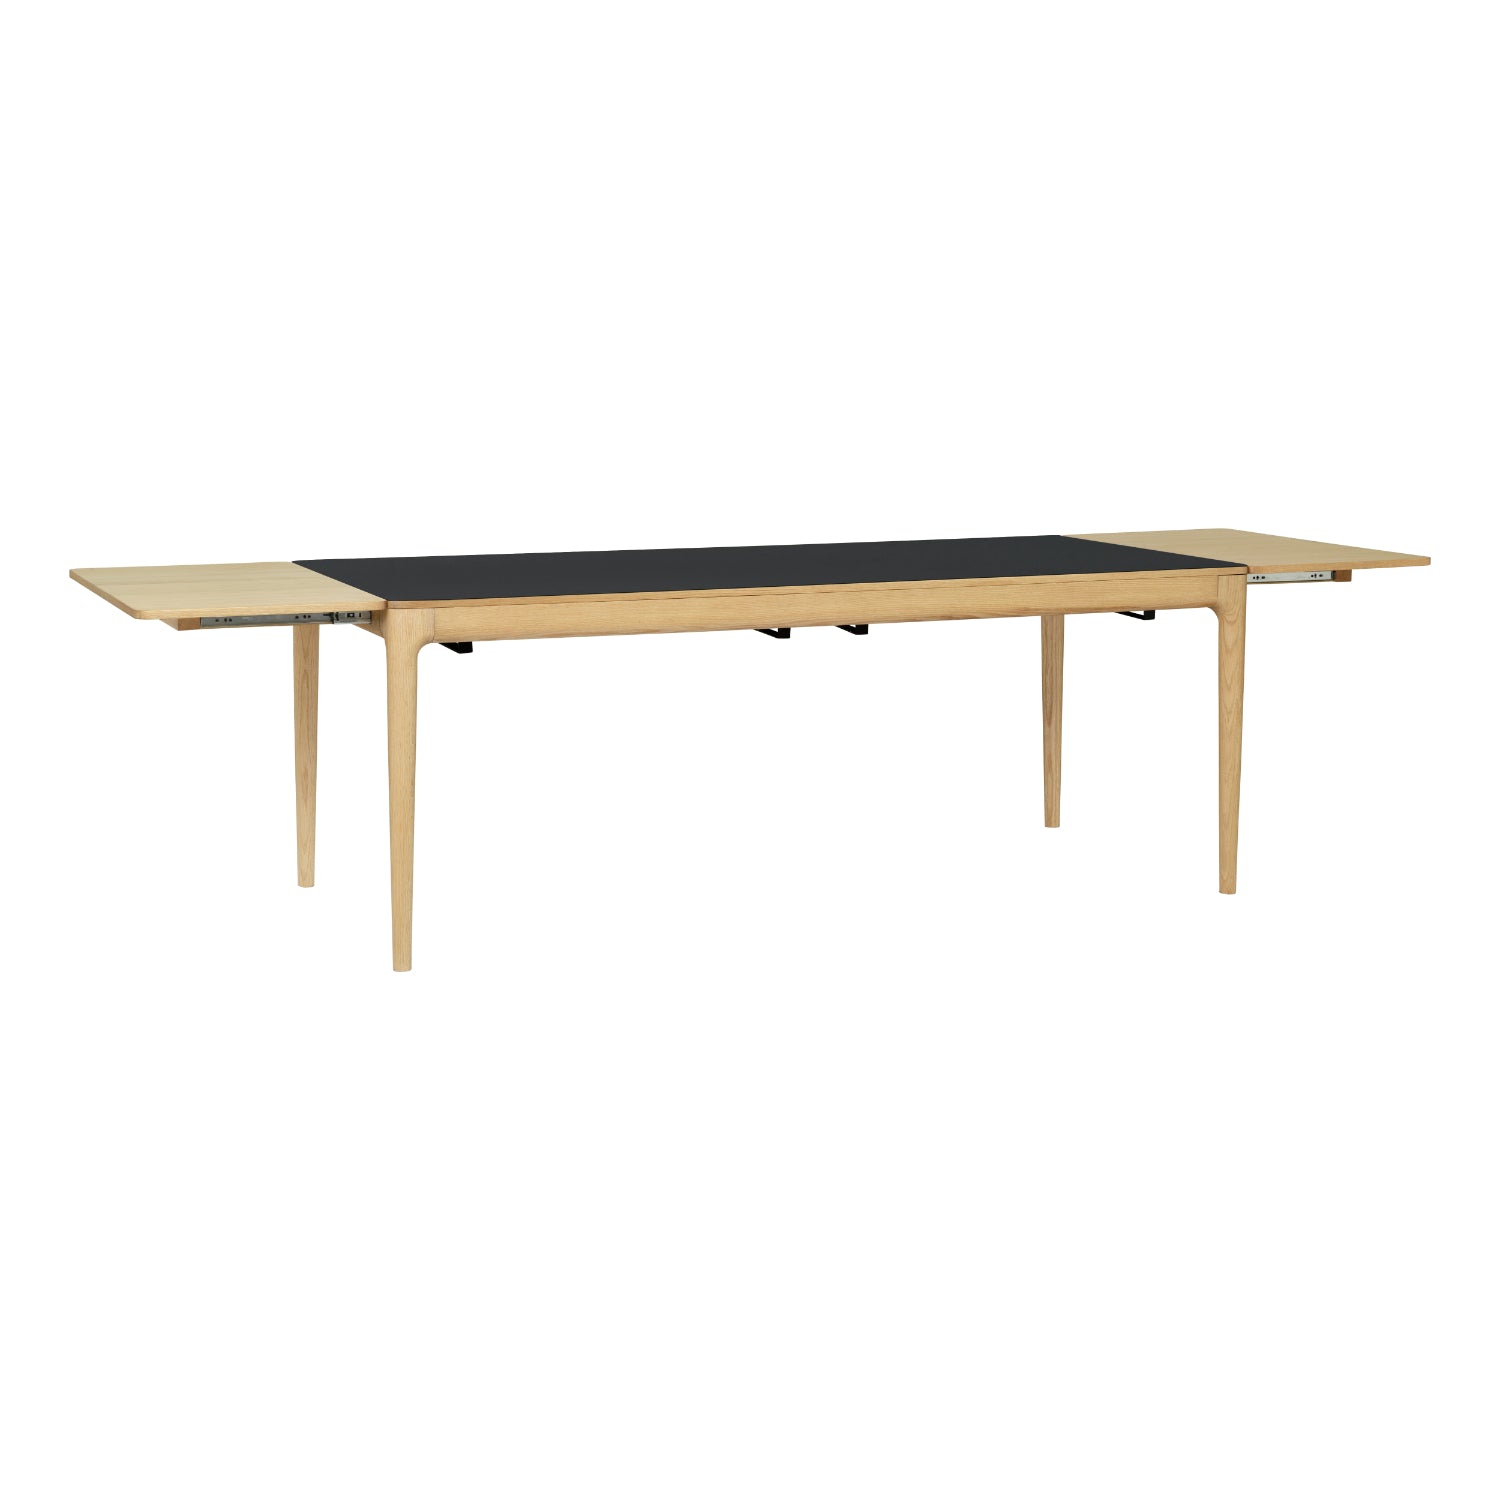 UMAGE - Heart'n'soul Dining Table